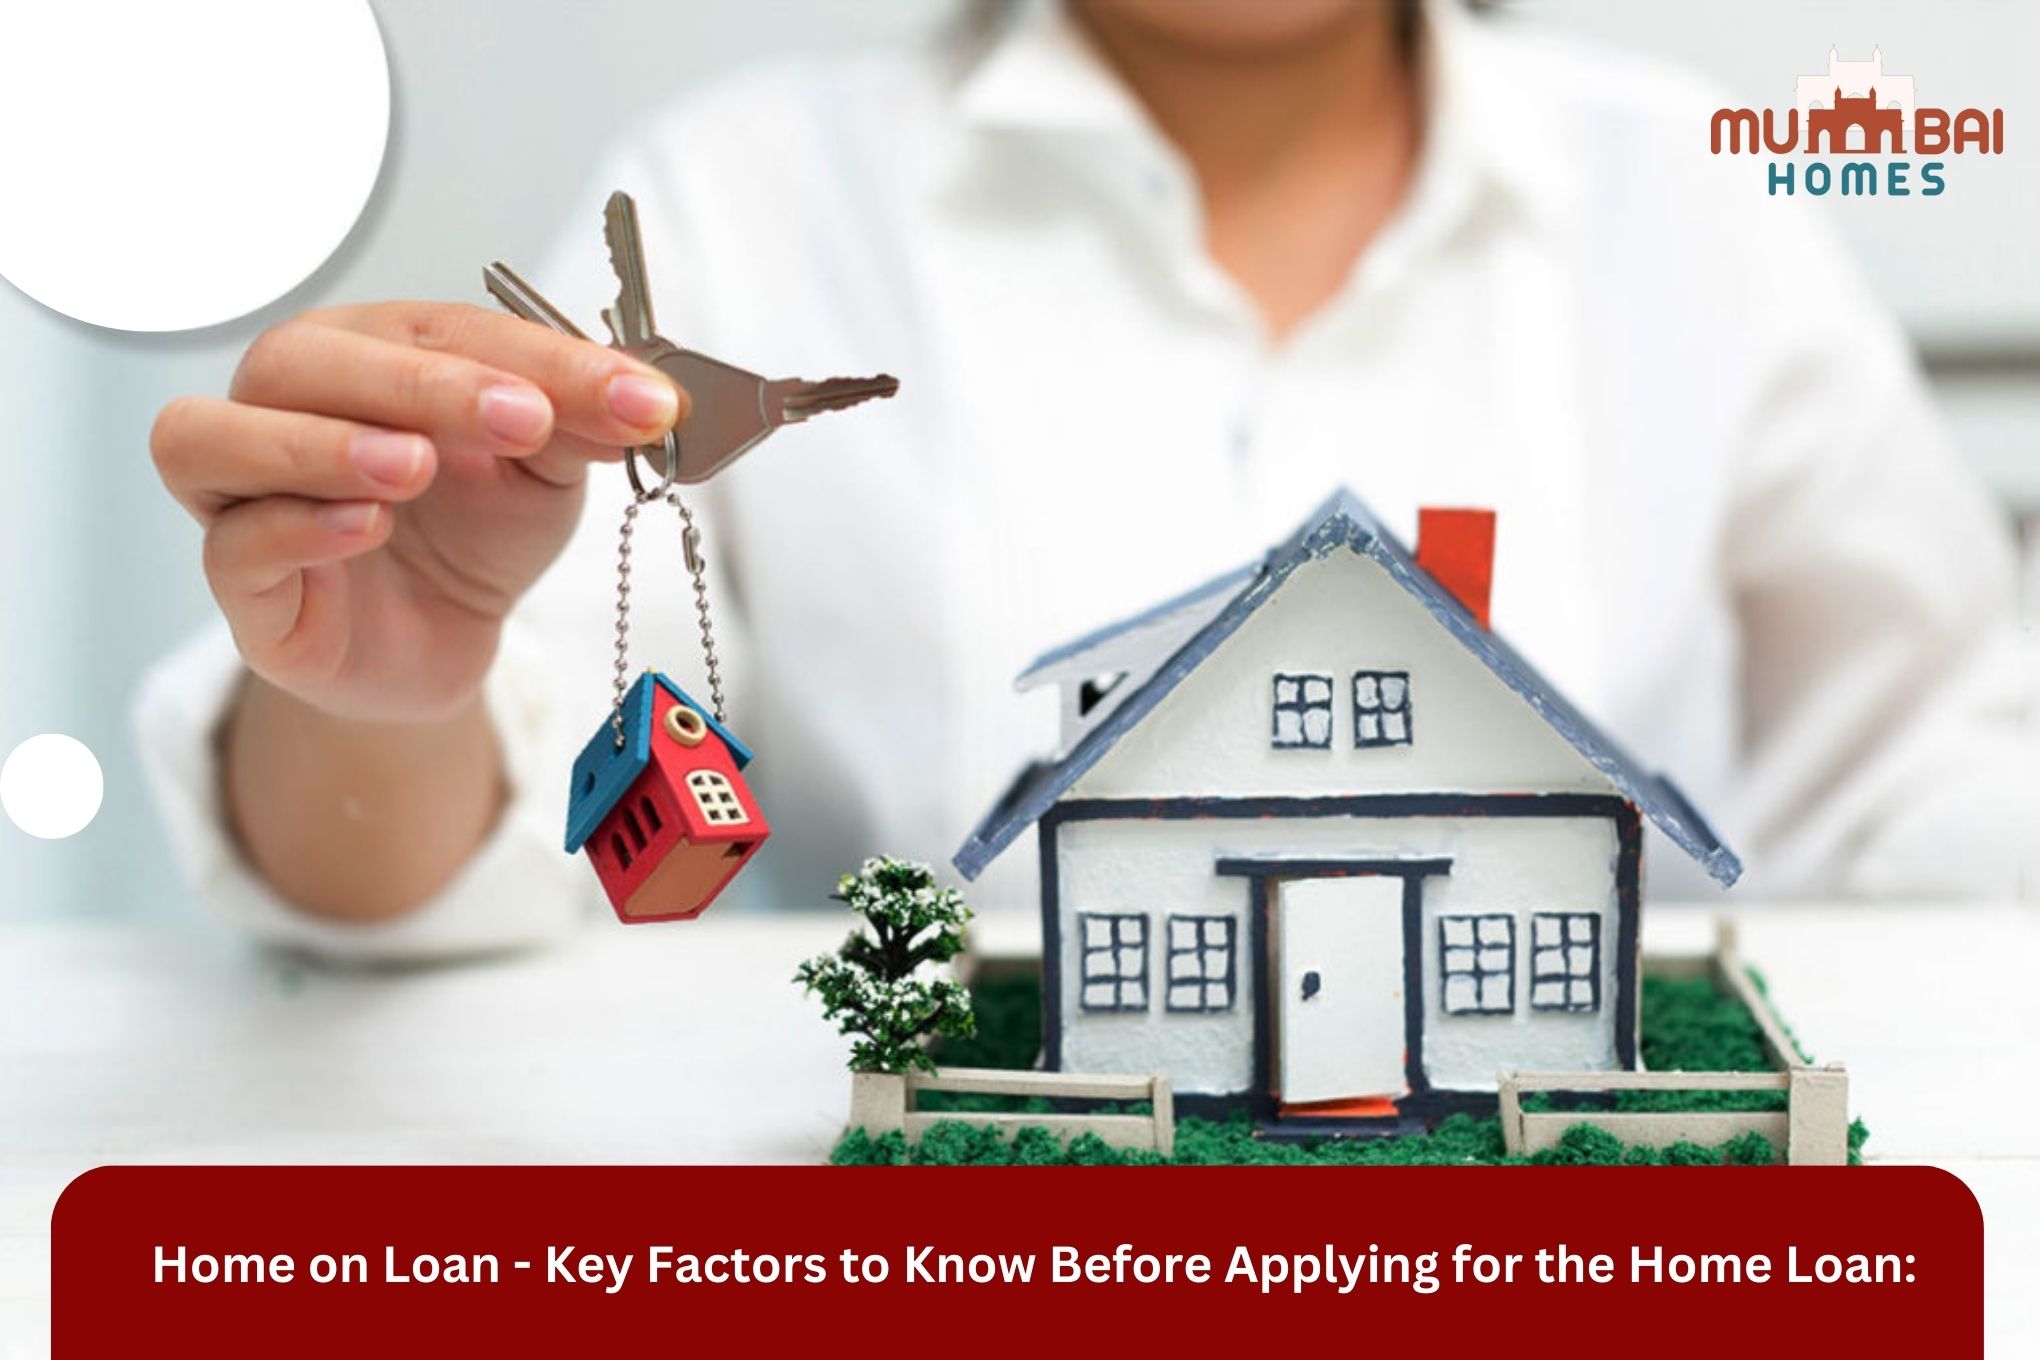 Key Factors to Know Before Applying for the Home Loan